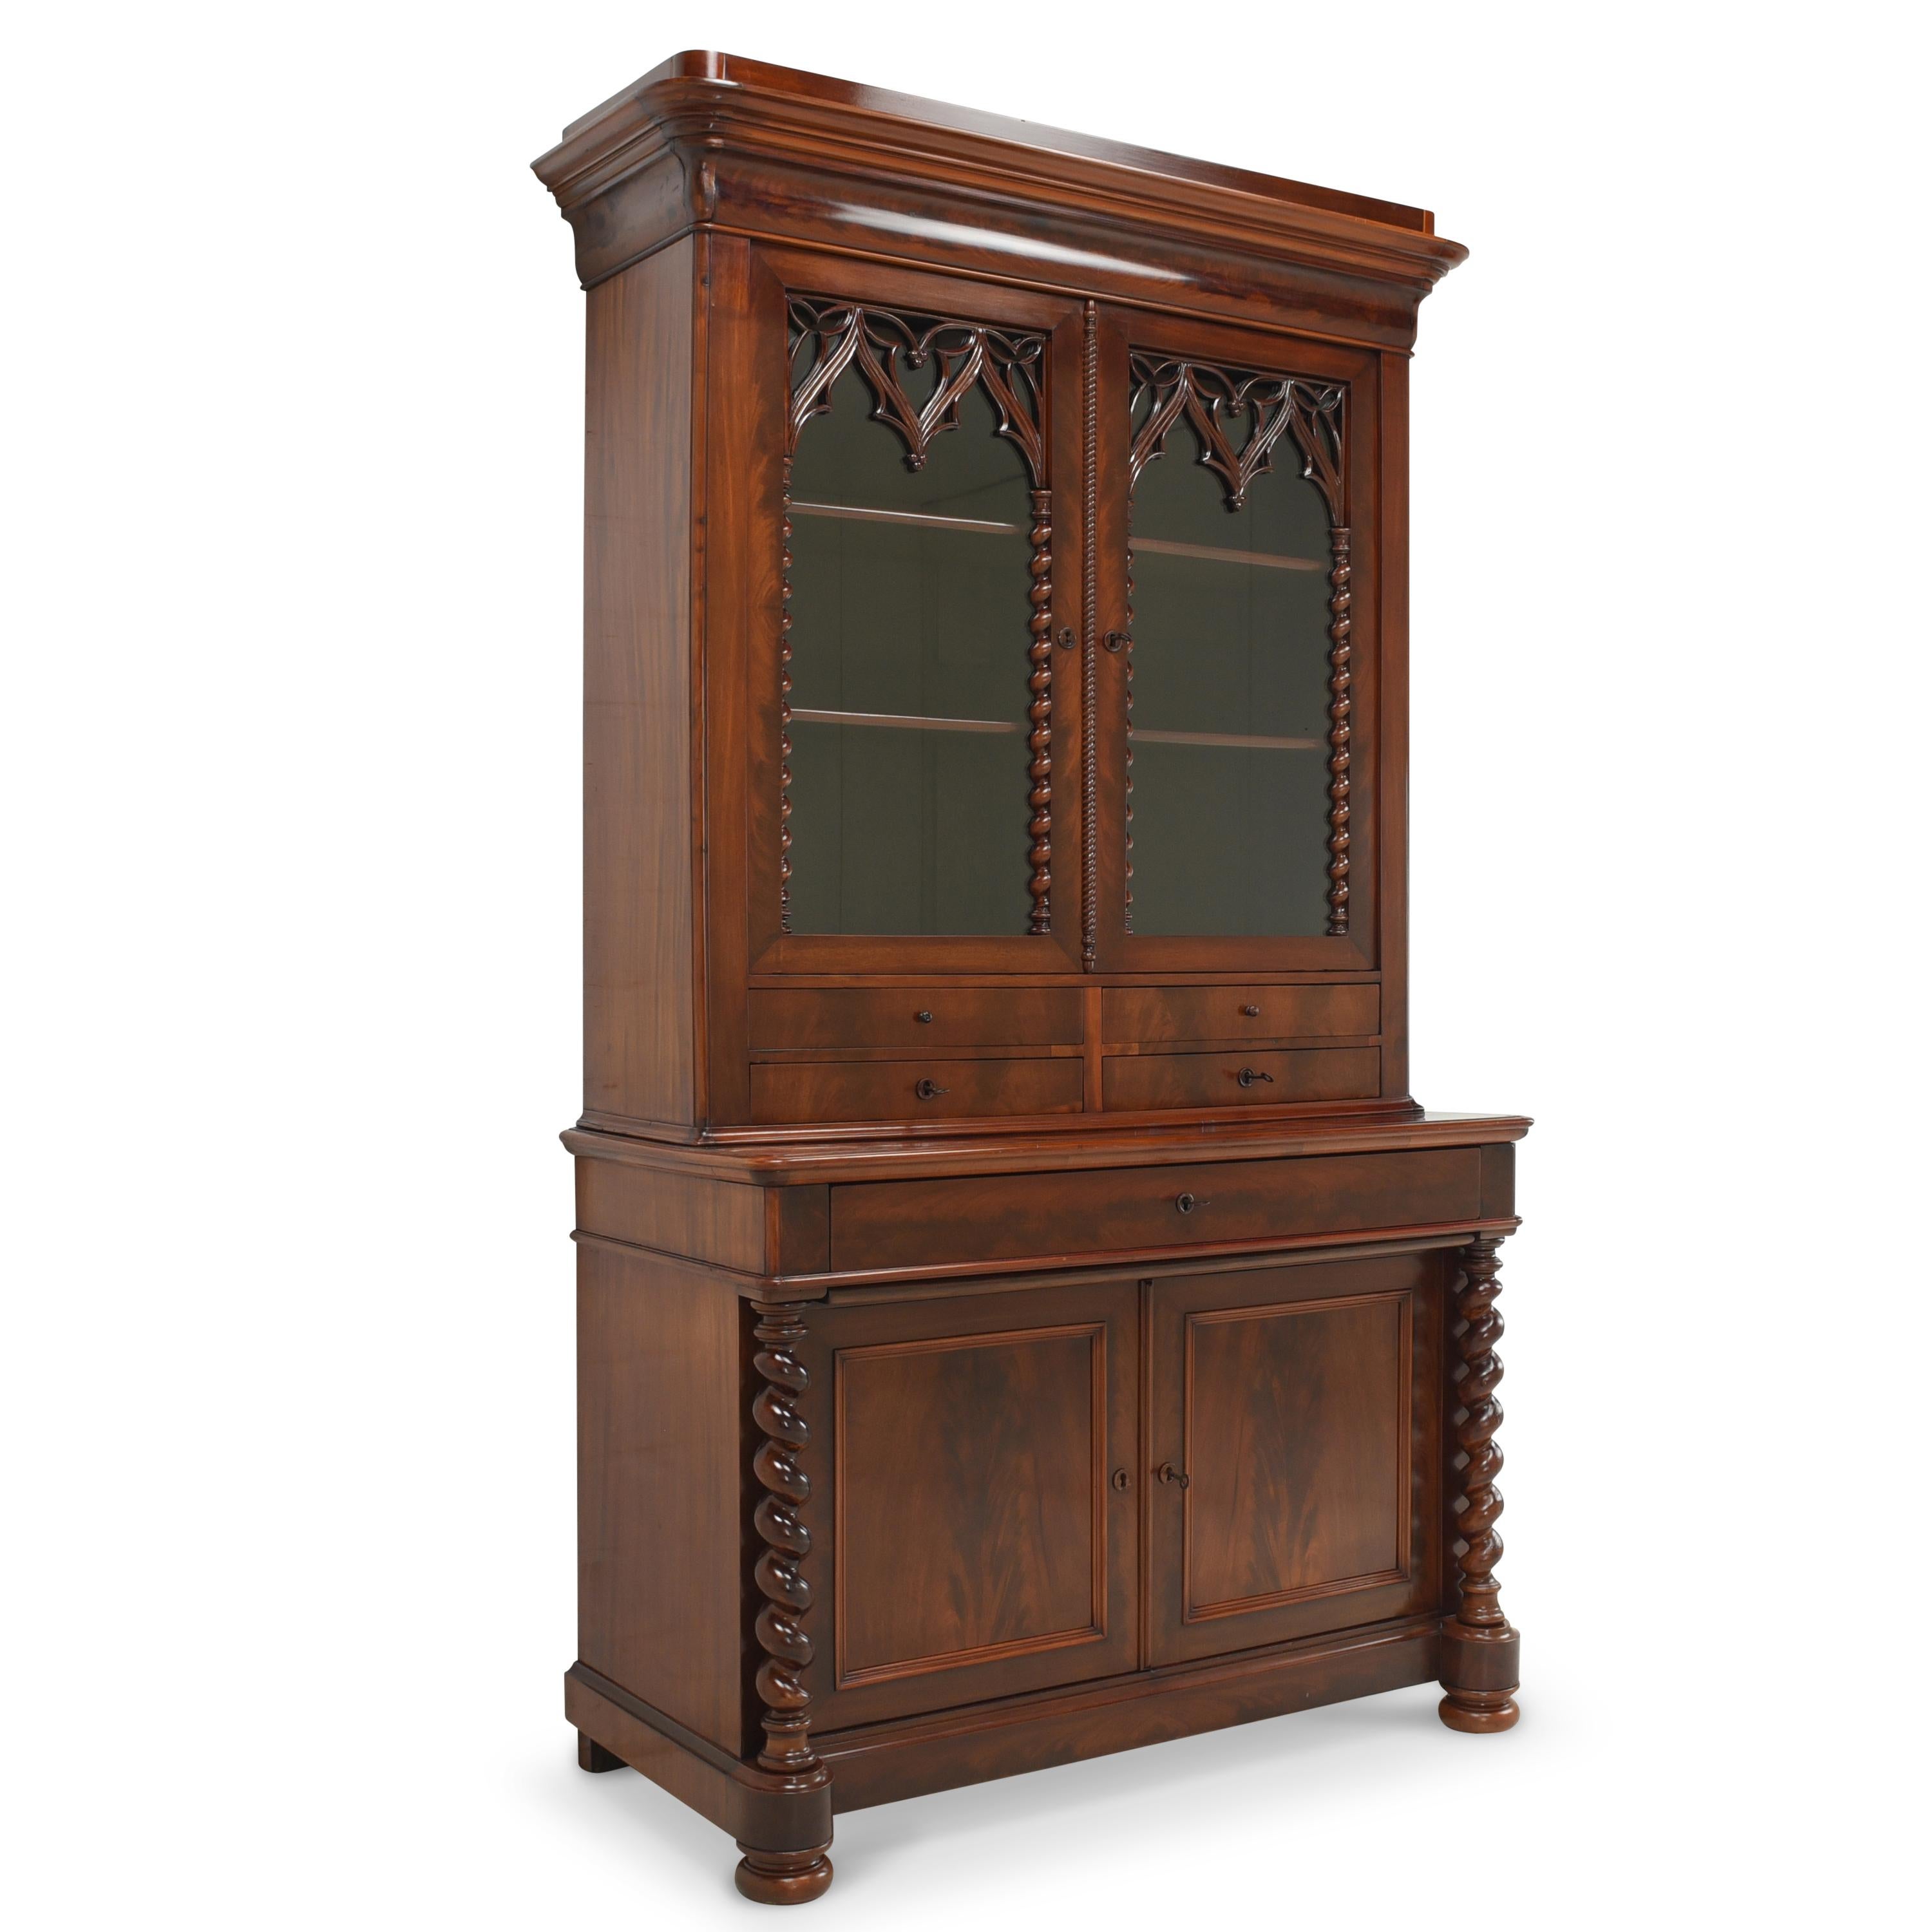 Display cabinet Louis Philippe restored circa 1880 mahogany buffet cabinet

Features:
Two-door base with height-adjustable shelf, drawer and pull-out board
Two-door top with two height-adjustable shelves and four drawers
Very high quality